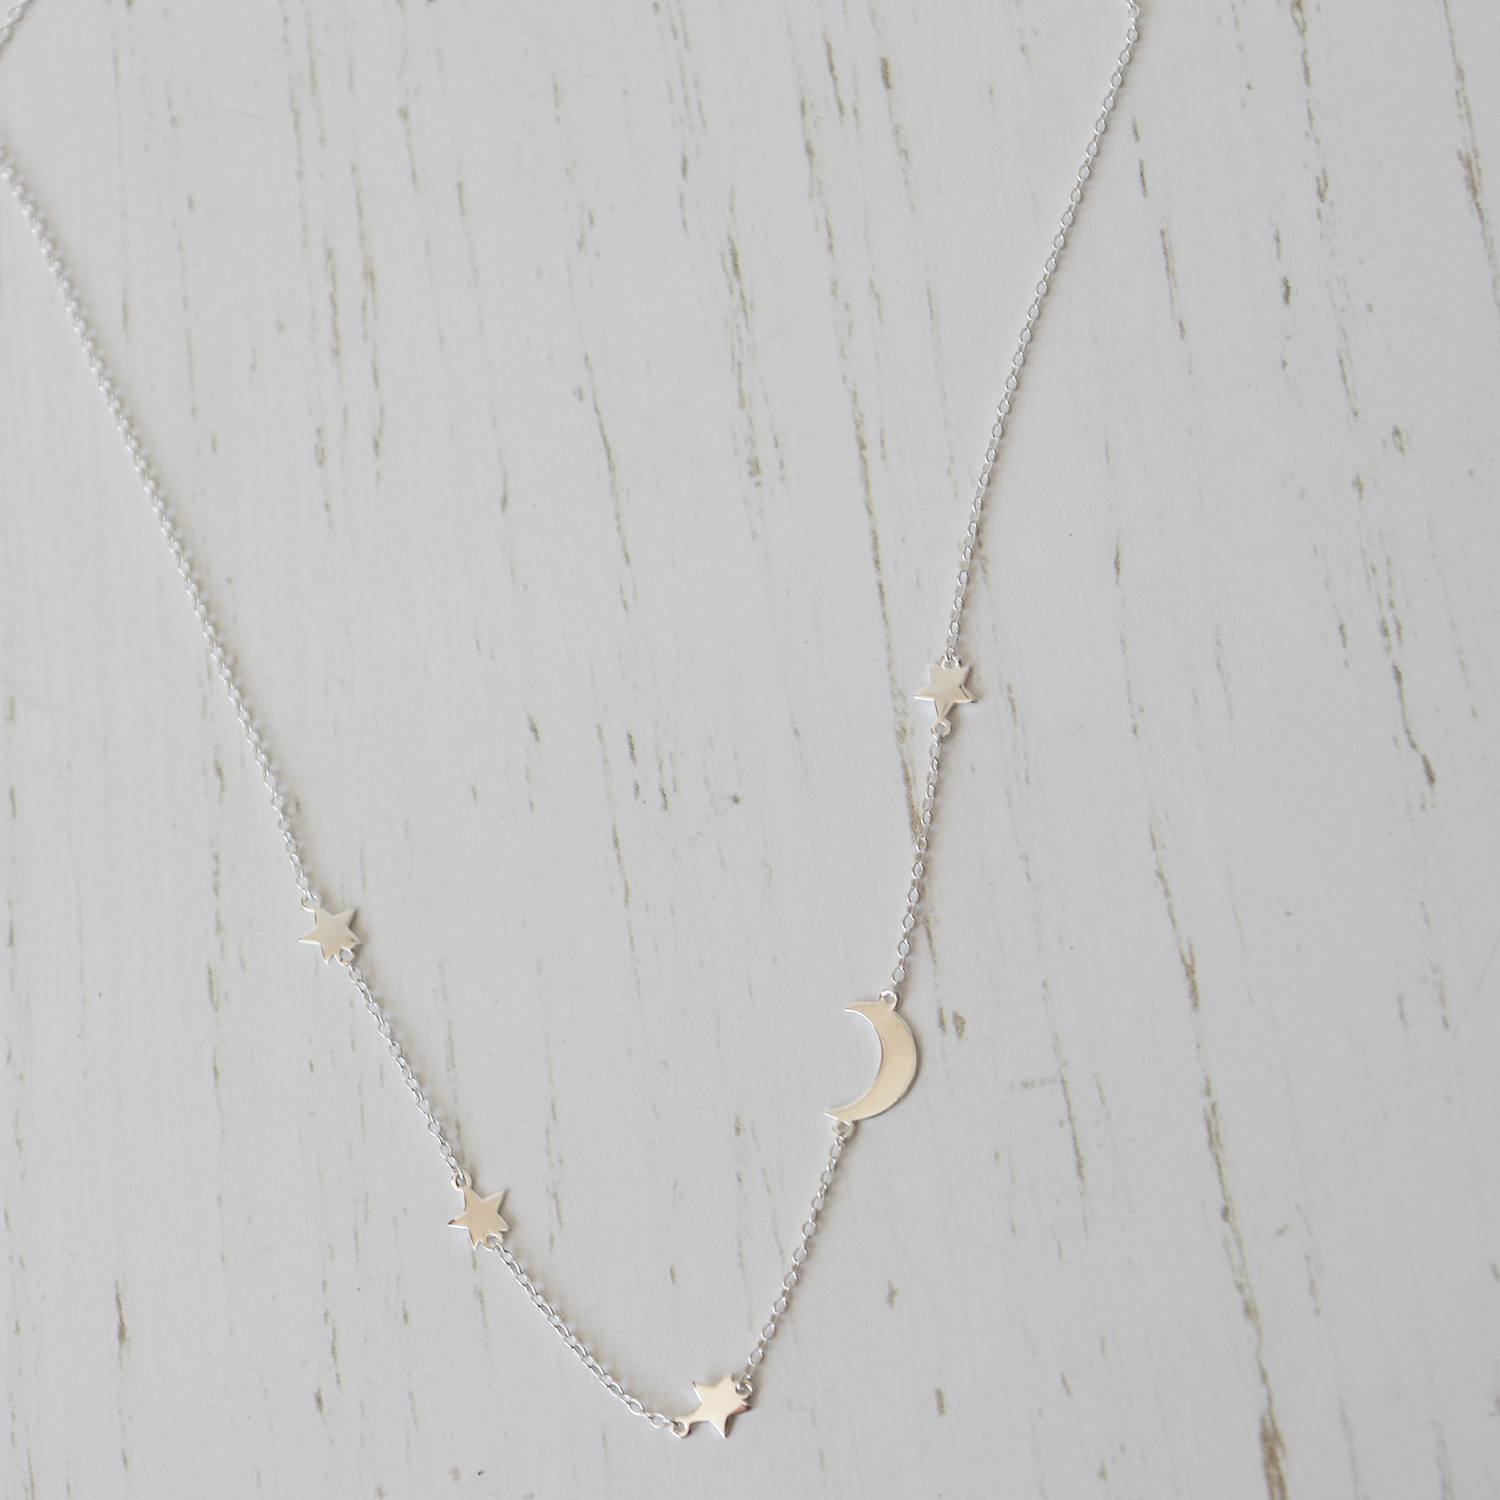 Stars and Moon Necklace - Aligned Gemini Co